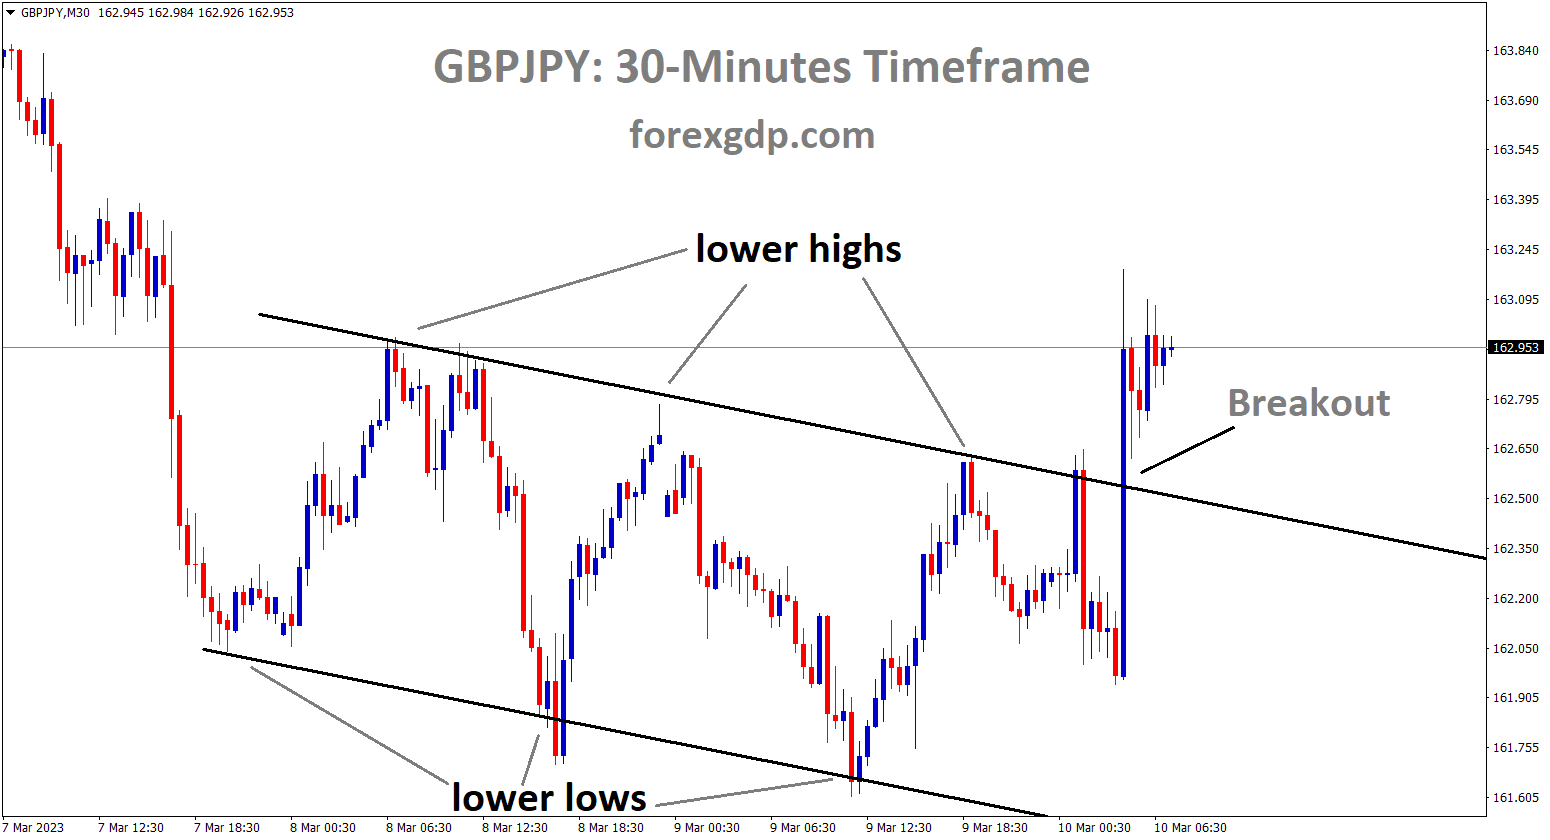 GBPJPY is moving in a descending channel and the market has broken the lower high area of the channel